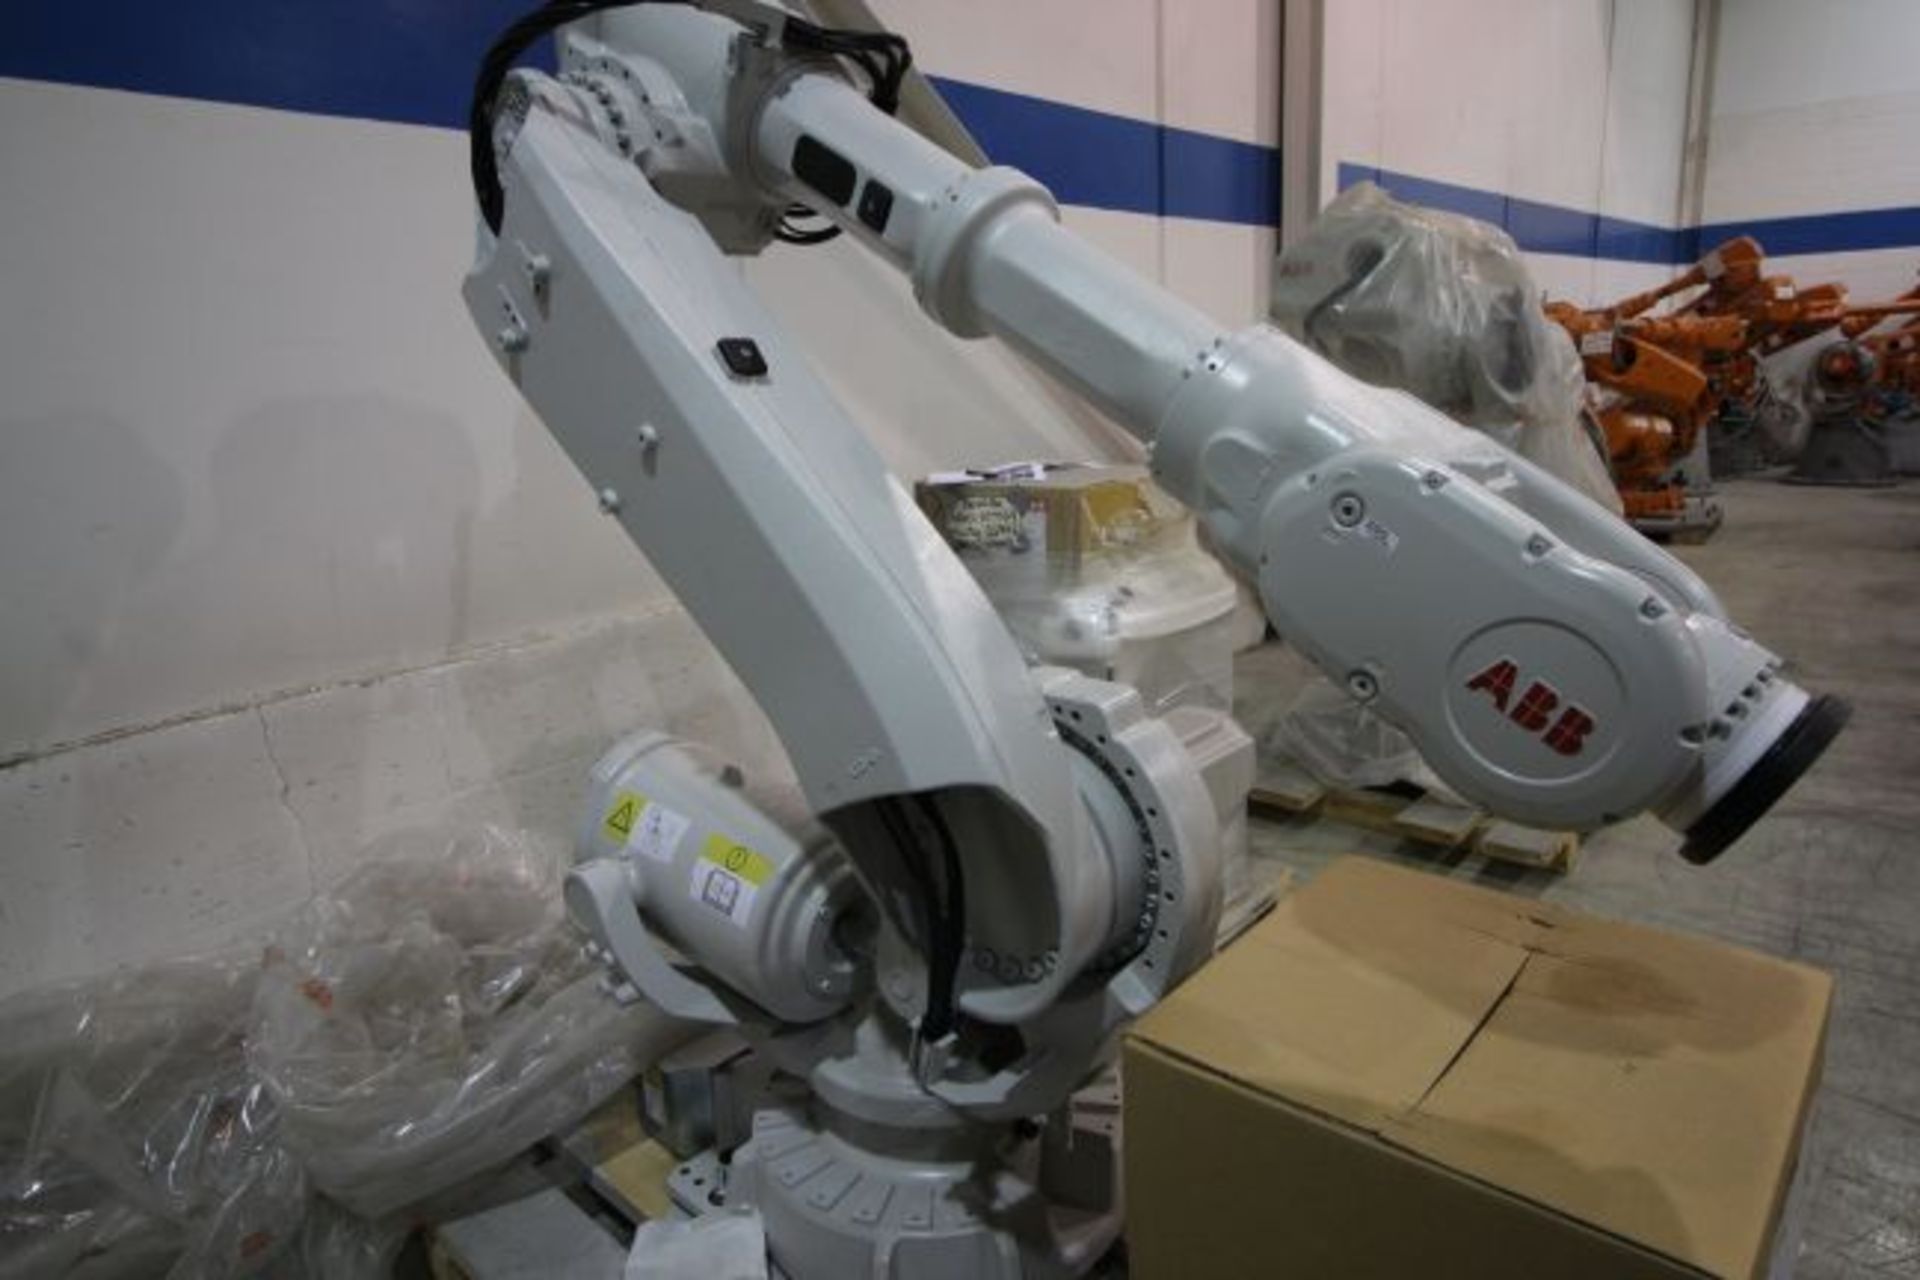 ABB ROBOT IRB 6640 3.2/130 WITH IRC5 CONTROLS, YEAR 2015, 107549, TEACH PENDANT & CABLES